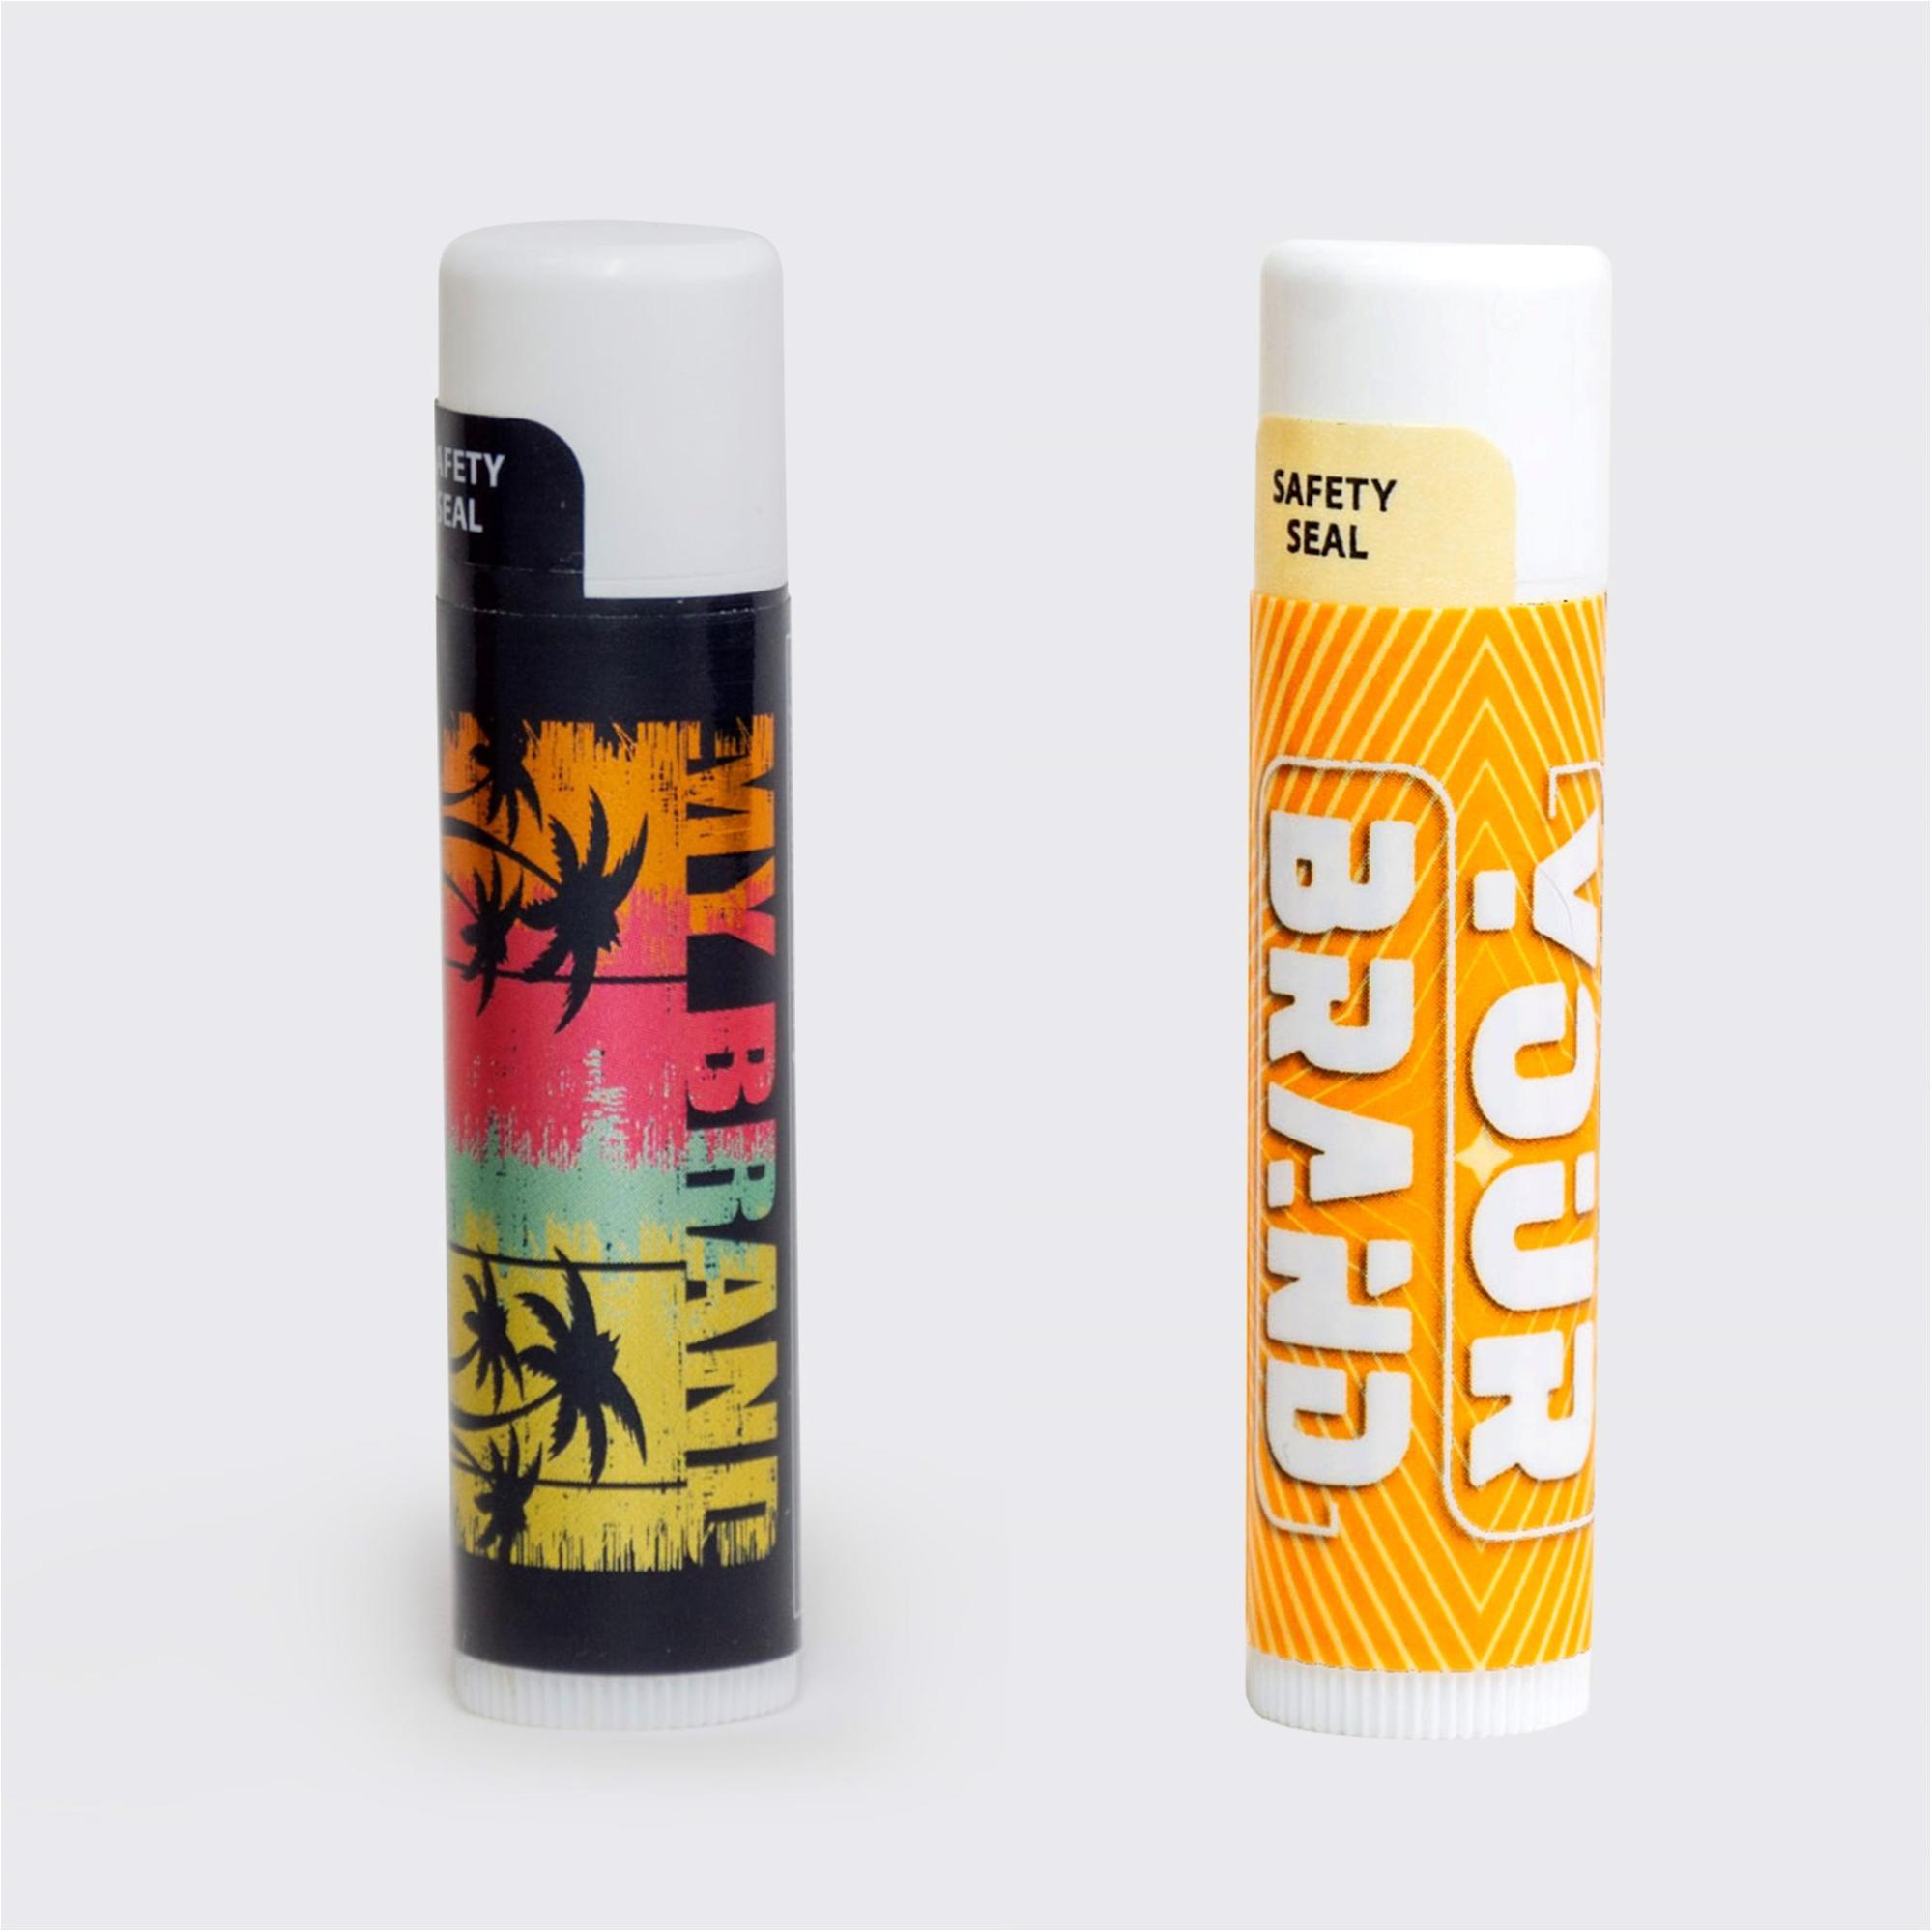 Lip balm with SPF 30 in two designs